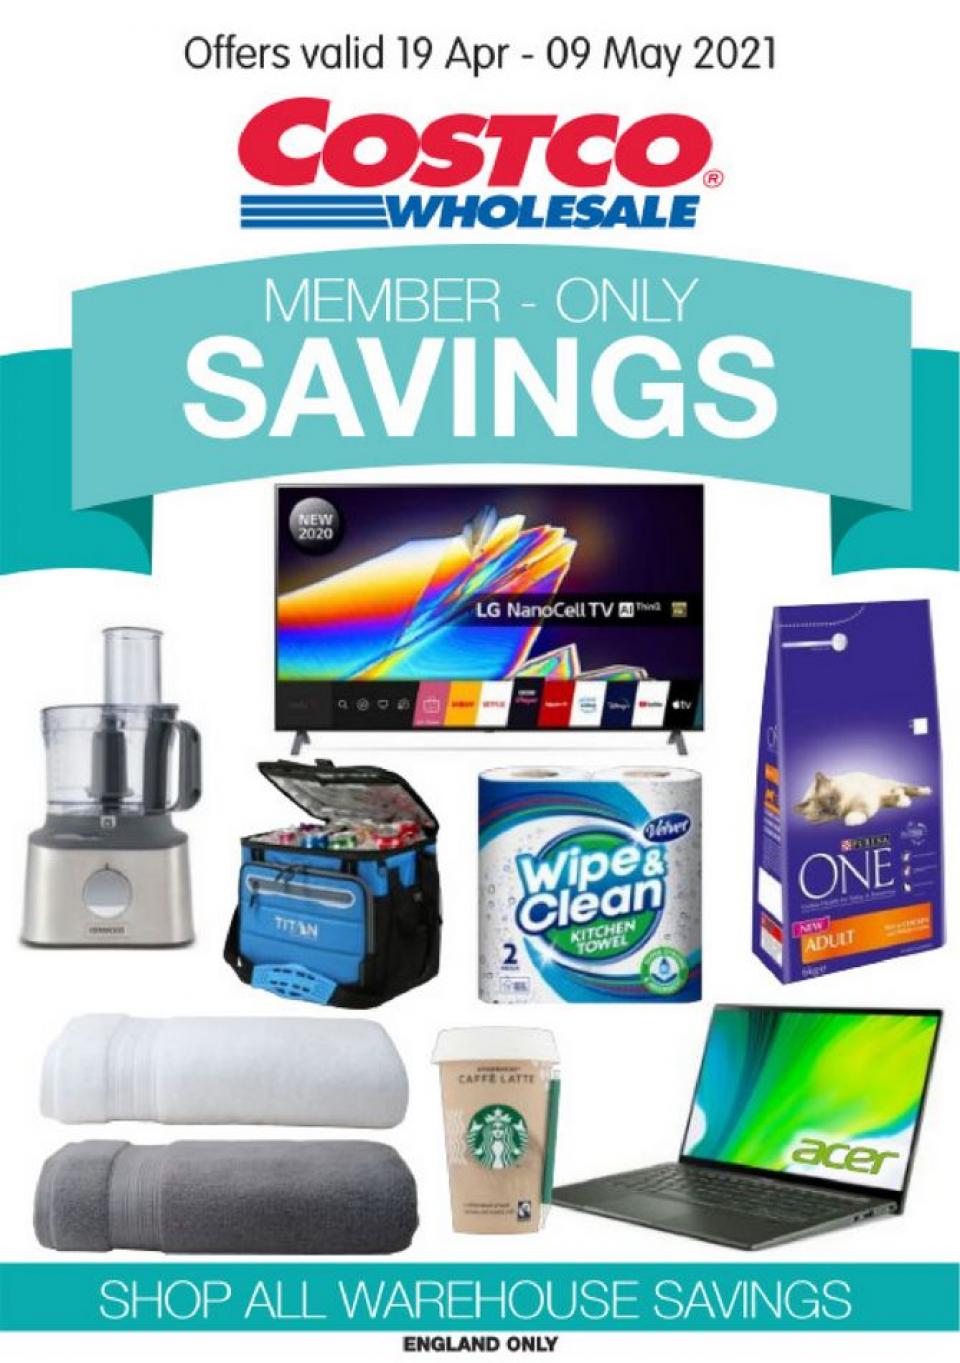 Costco Offers Member-Only Savings 19 Apr – 9 May 2021